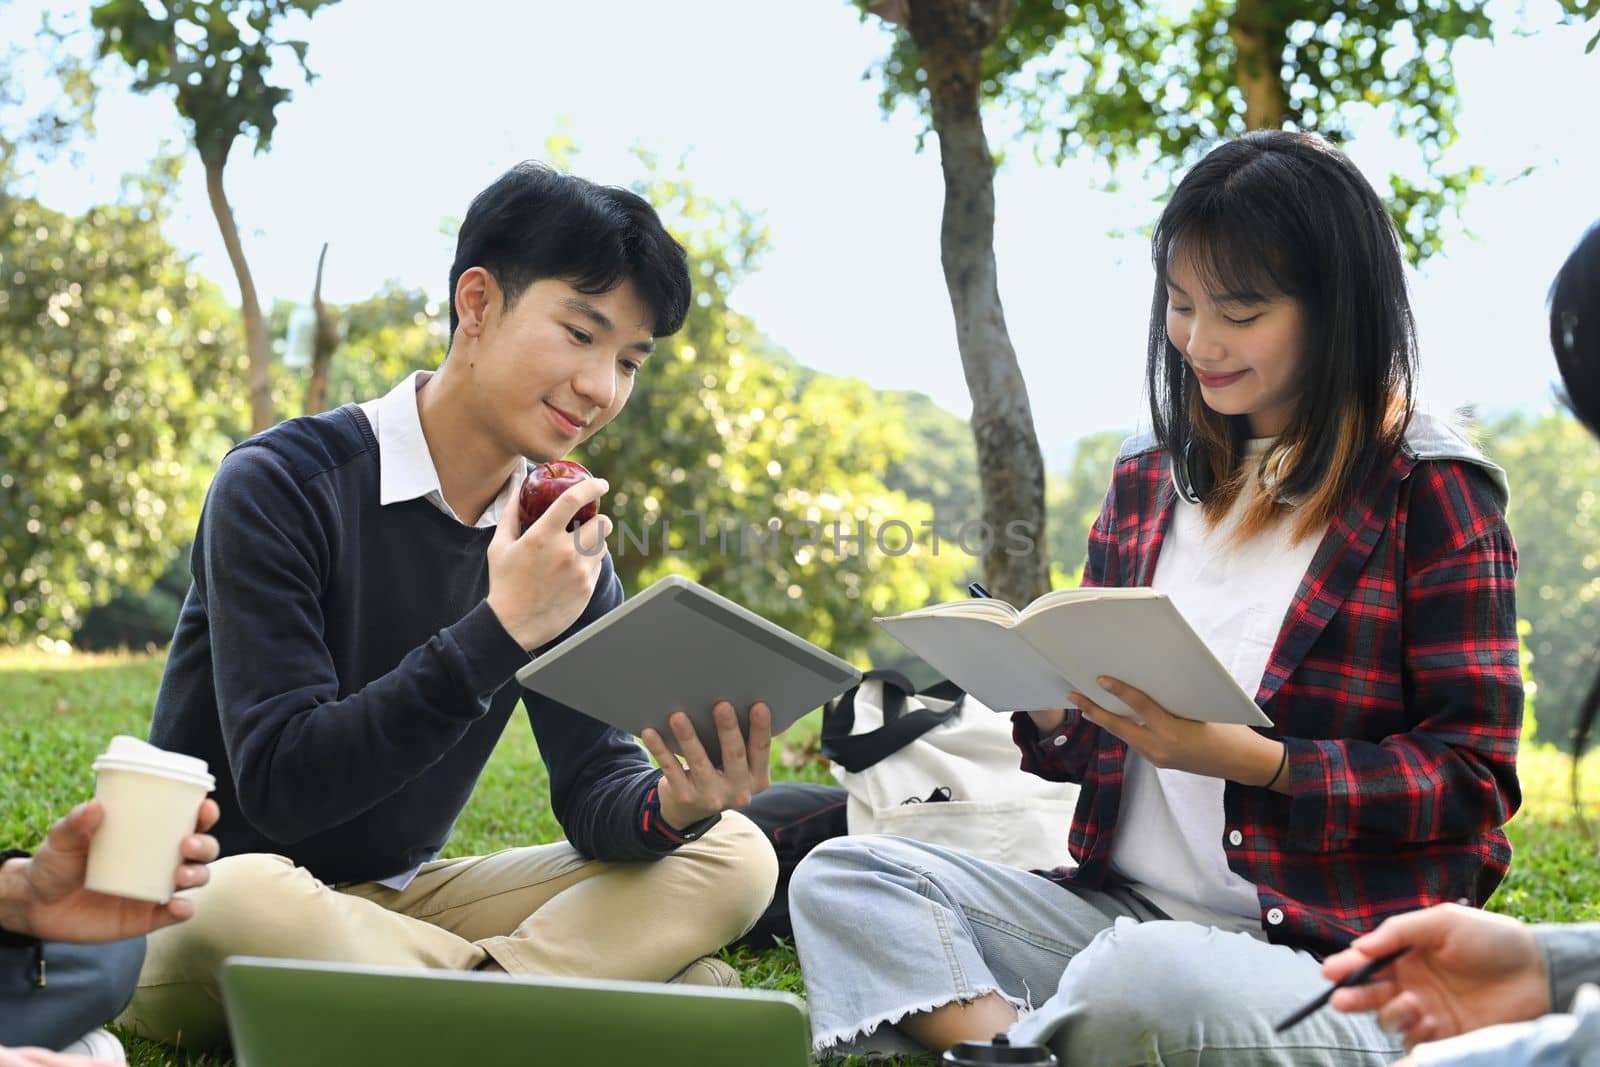 Image of university students chatting with each other after class while sitting on grass in the campus. Education and lifestyle concept by prathanchorruangsak